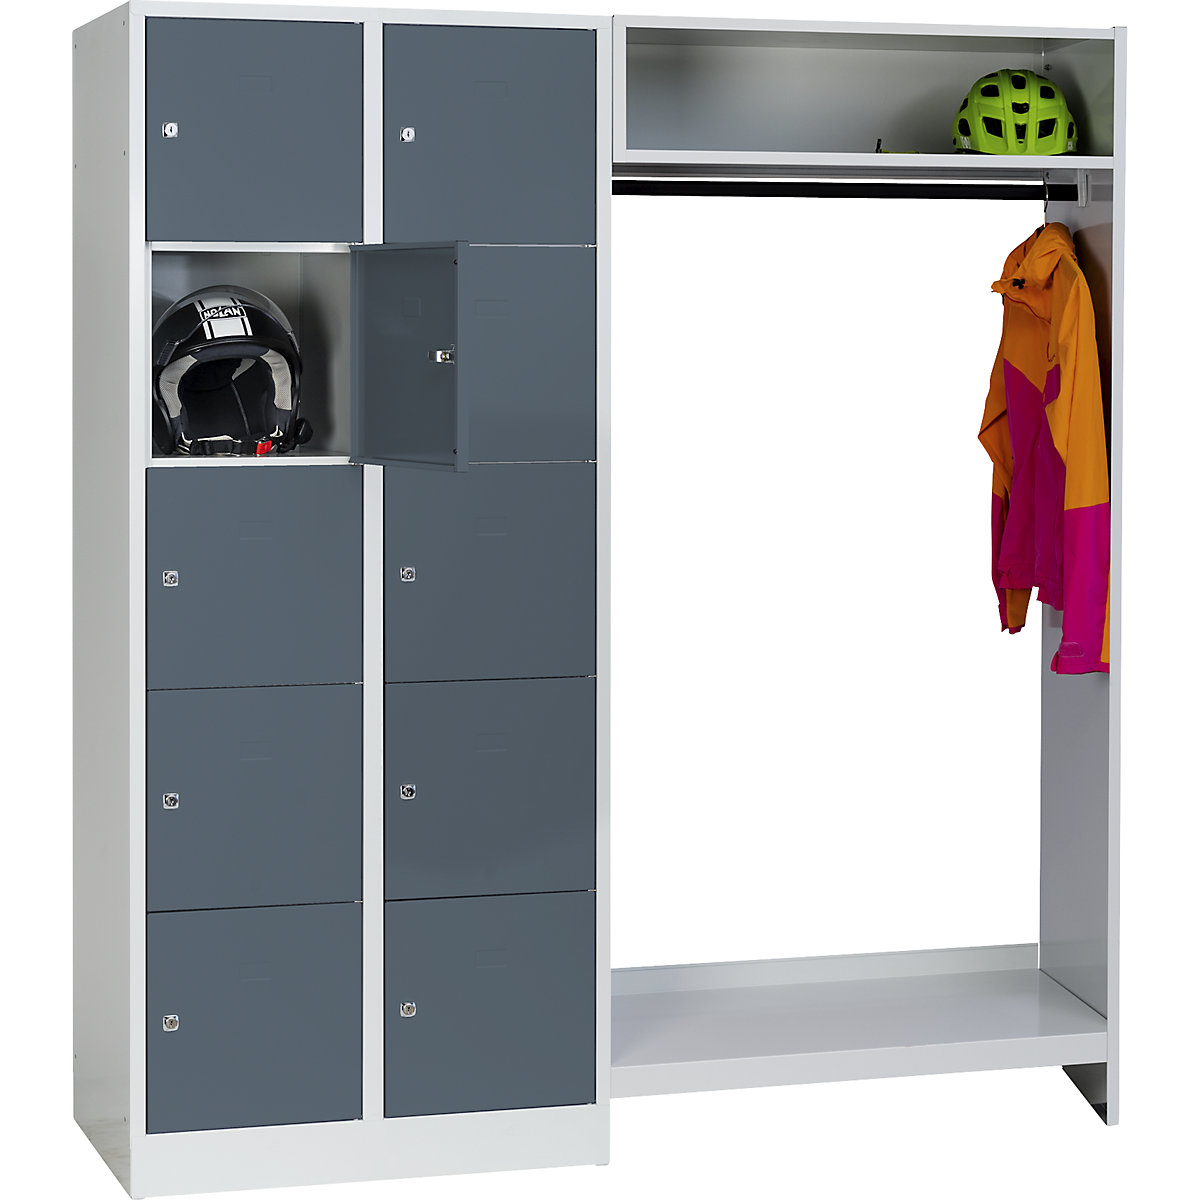 Cloakroom locker system – Wolf, 10 compartments on left, 10 coat hangers, overall width 1670 mm, compartment width 398 mm, basalt grey/light grey-11